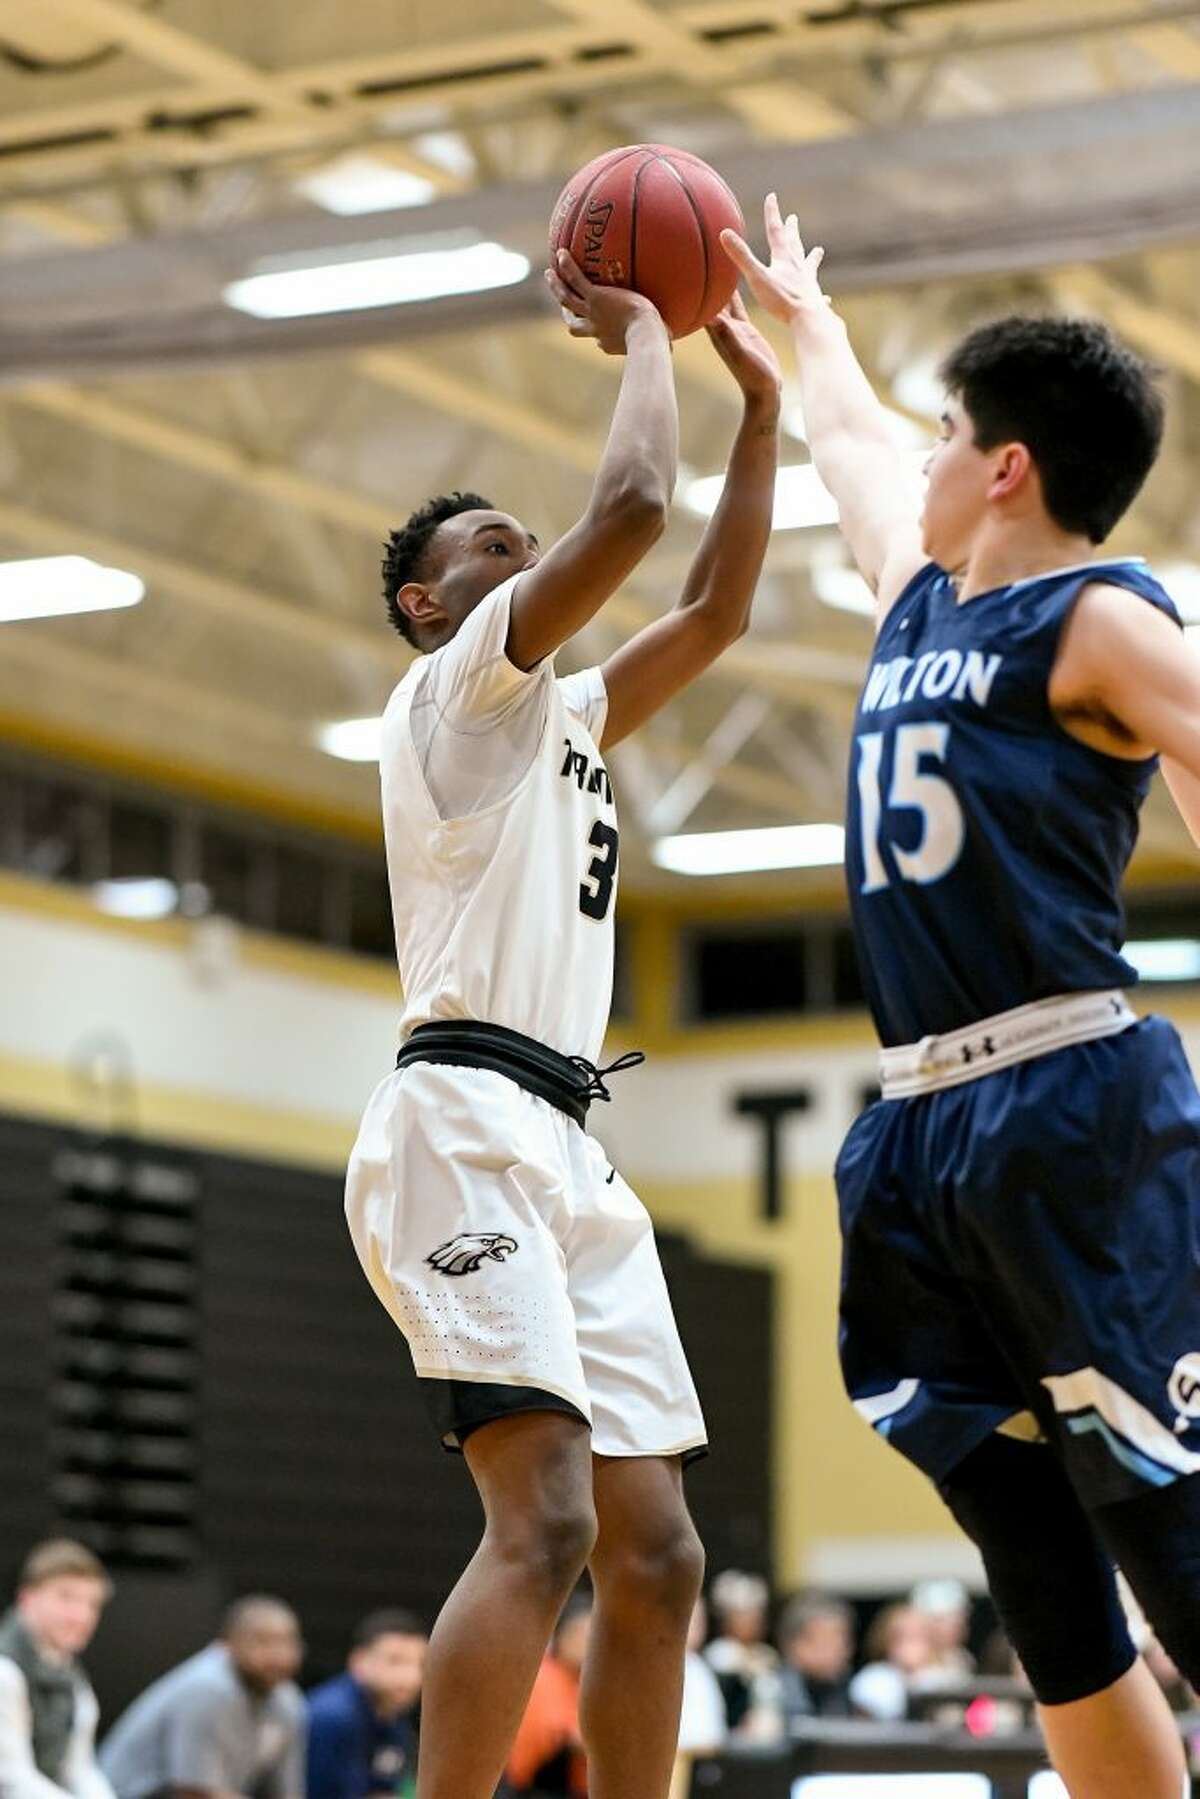 Timmond Williams scored 35 points for Trumbull High.Photo: David G. Whitham / For Hearst Connecticut Media